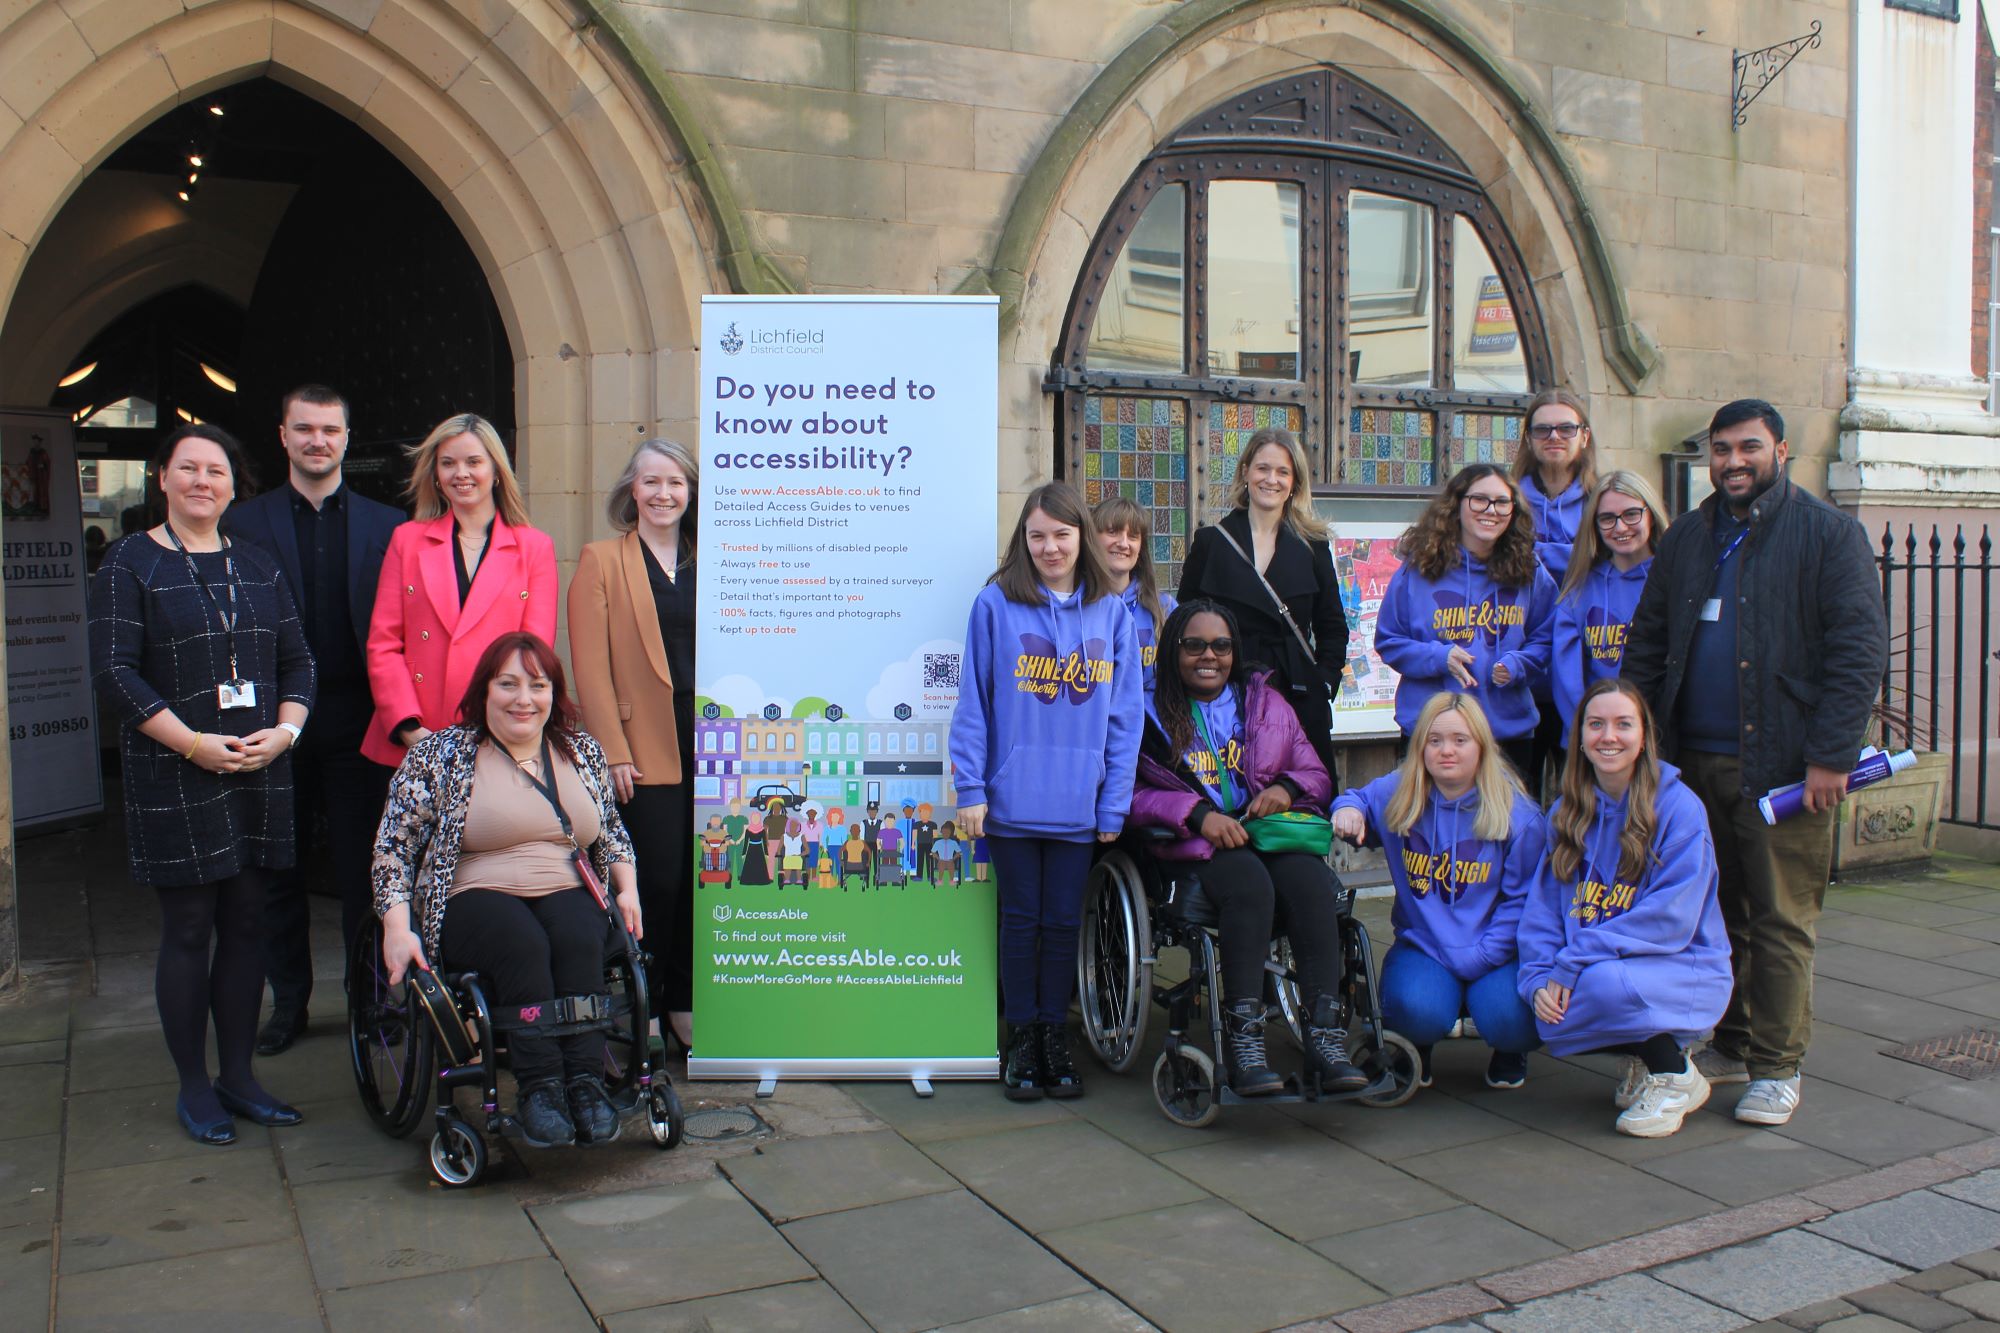 A picture celebrating the launch of accessibility guides for disabled people in Lichfield District at the Guildhall yesterday.